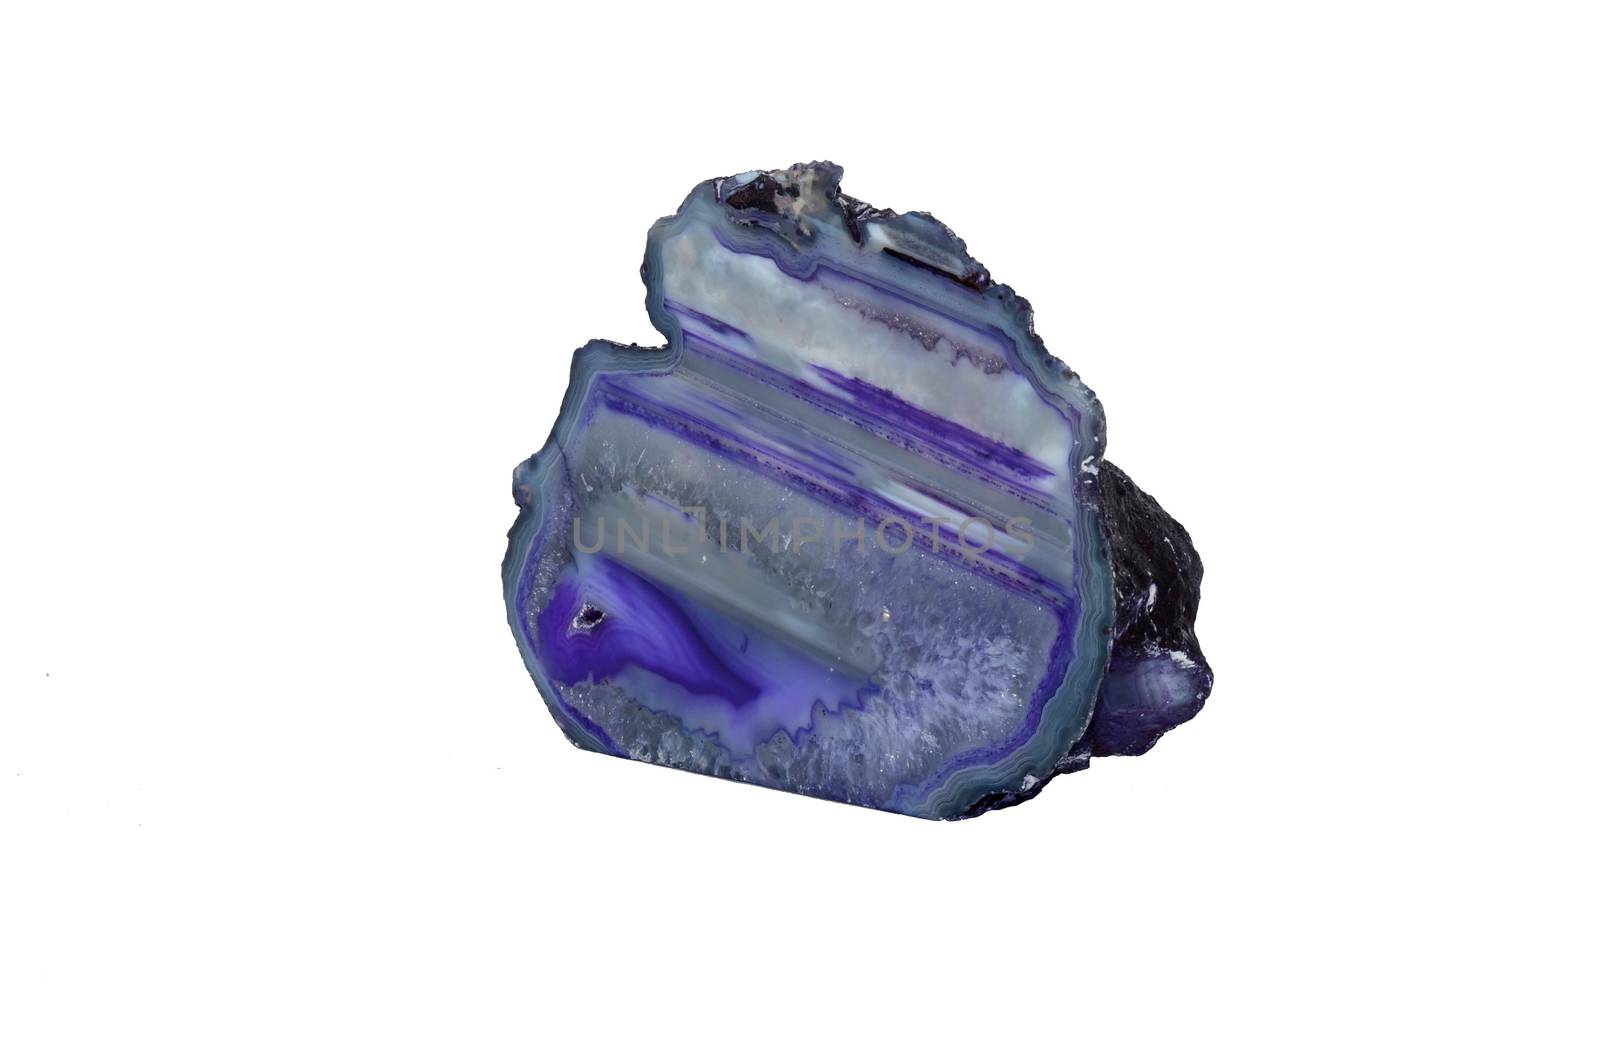 Sample of violet Agate geode a beautiful nature specimen isolated on white background